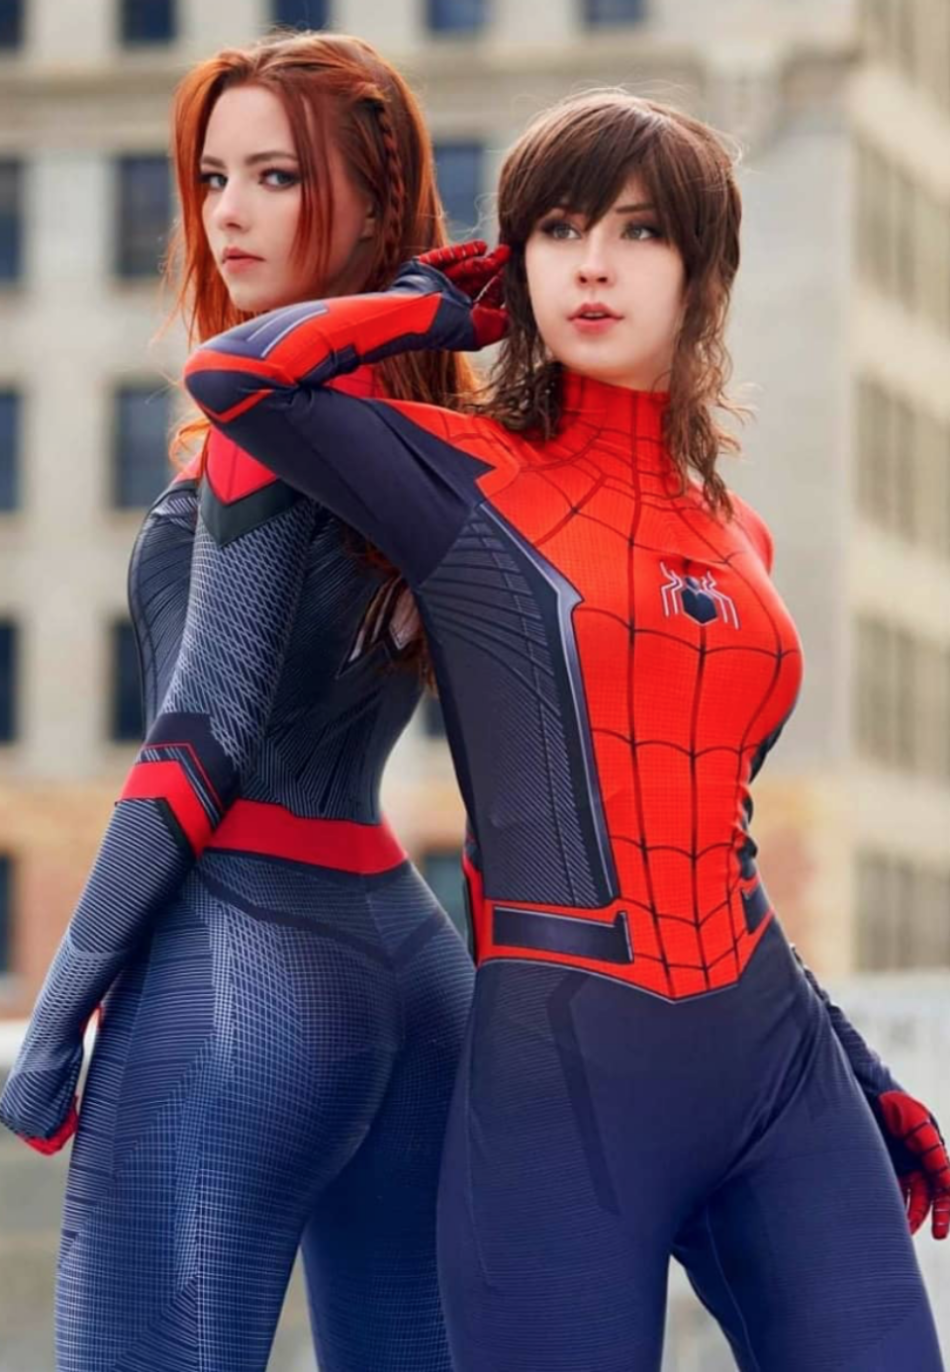 Sexy Red Hot Cosplay Girls Spiderman Women Best Photo Compilation 2021 (89 HQ Photos) 101